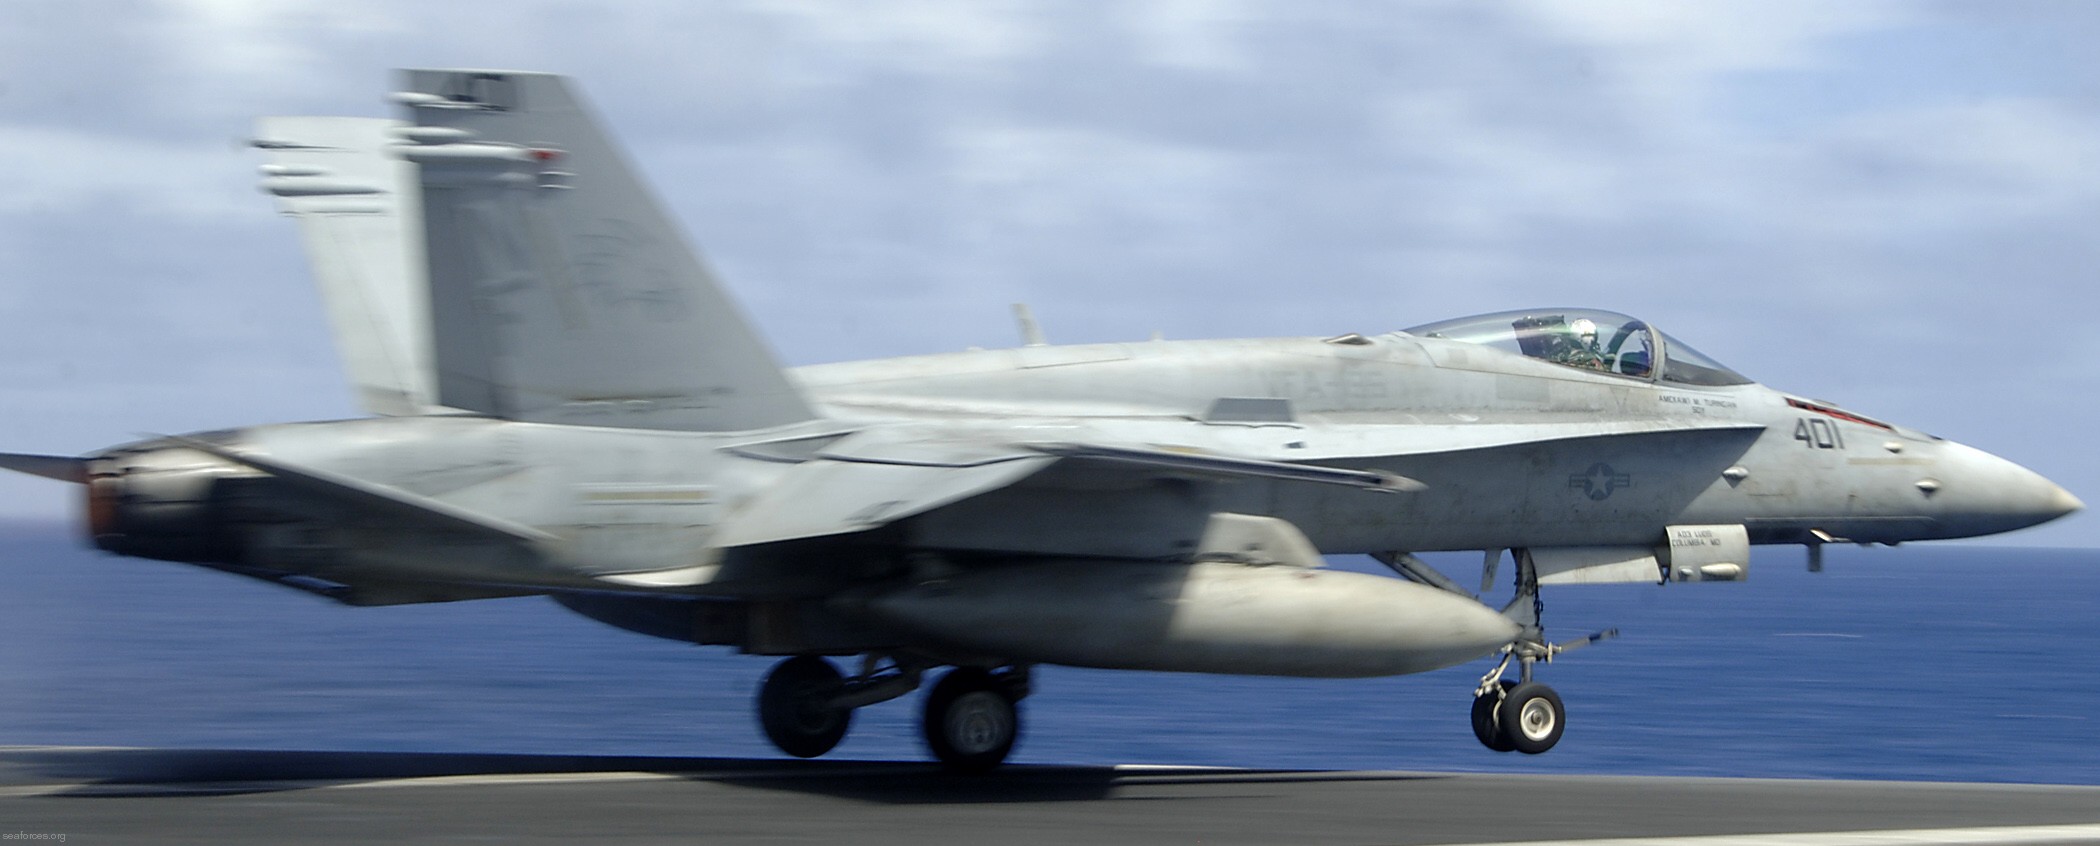 vfa-195 dambusters strike fighter squadron navy f/a-18c hornet carrier air wing cvw-5 uss george washington cvn-73 99